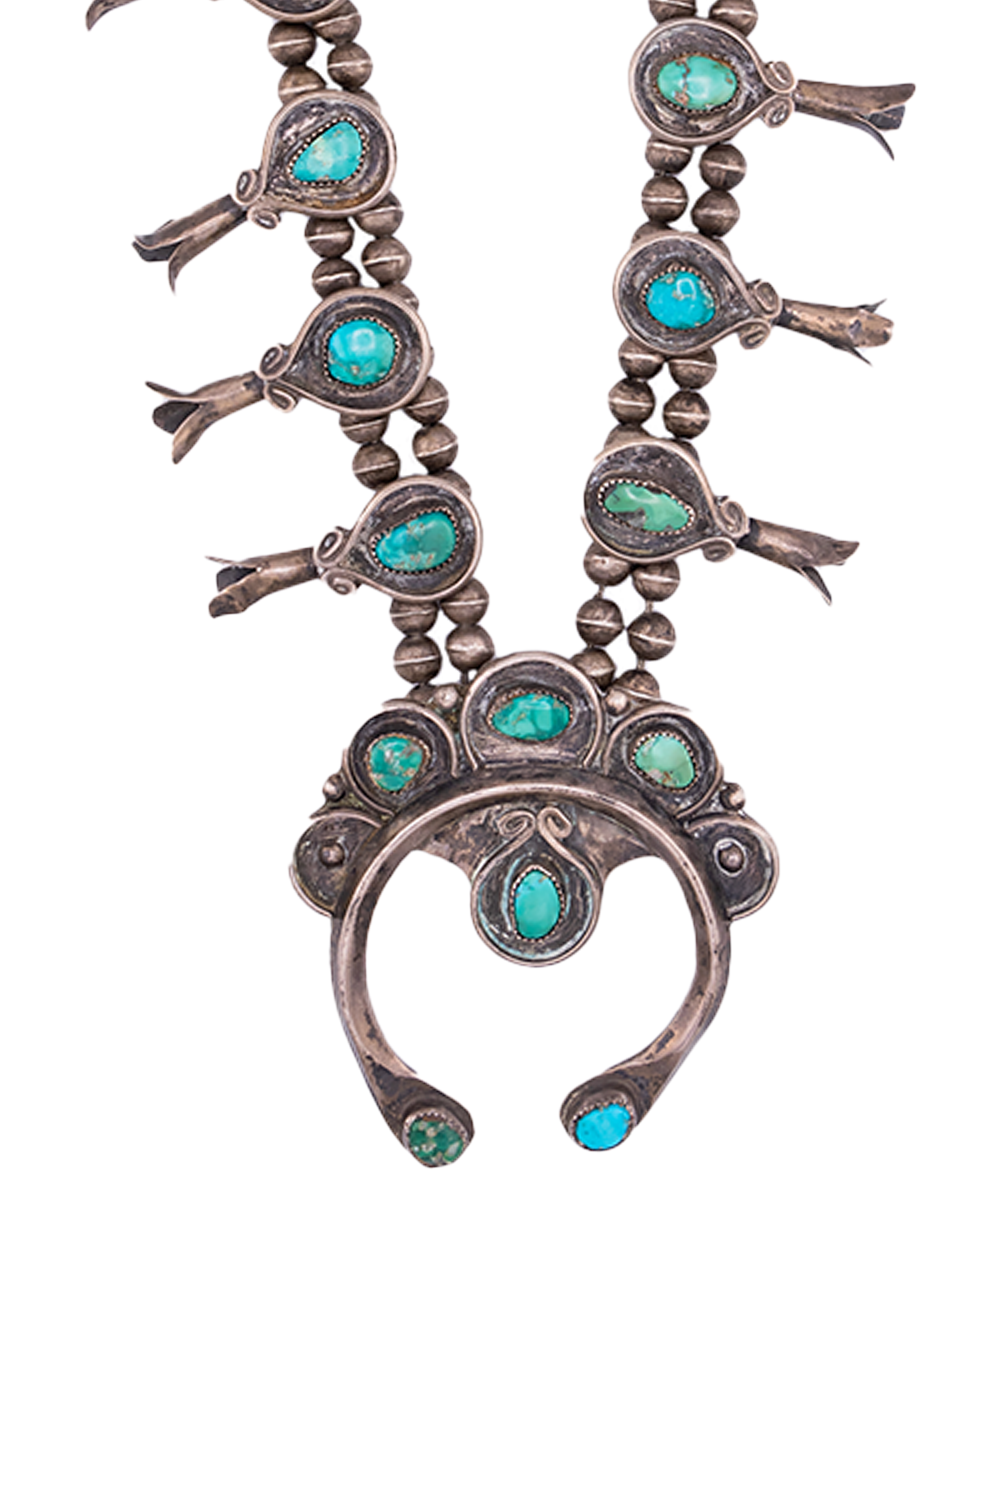 Navajo Old Pawn Squash Blossom Necklace Silver Beads With 12 Squash Blossoms And A Finely Figu Circa 1927